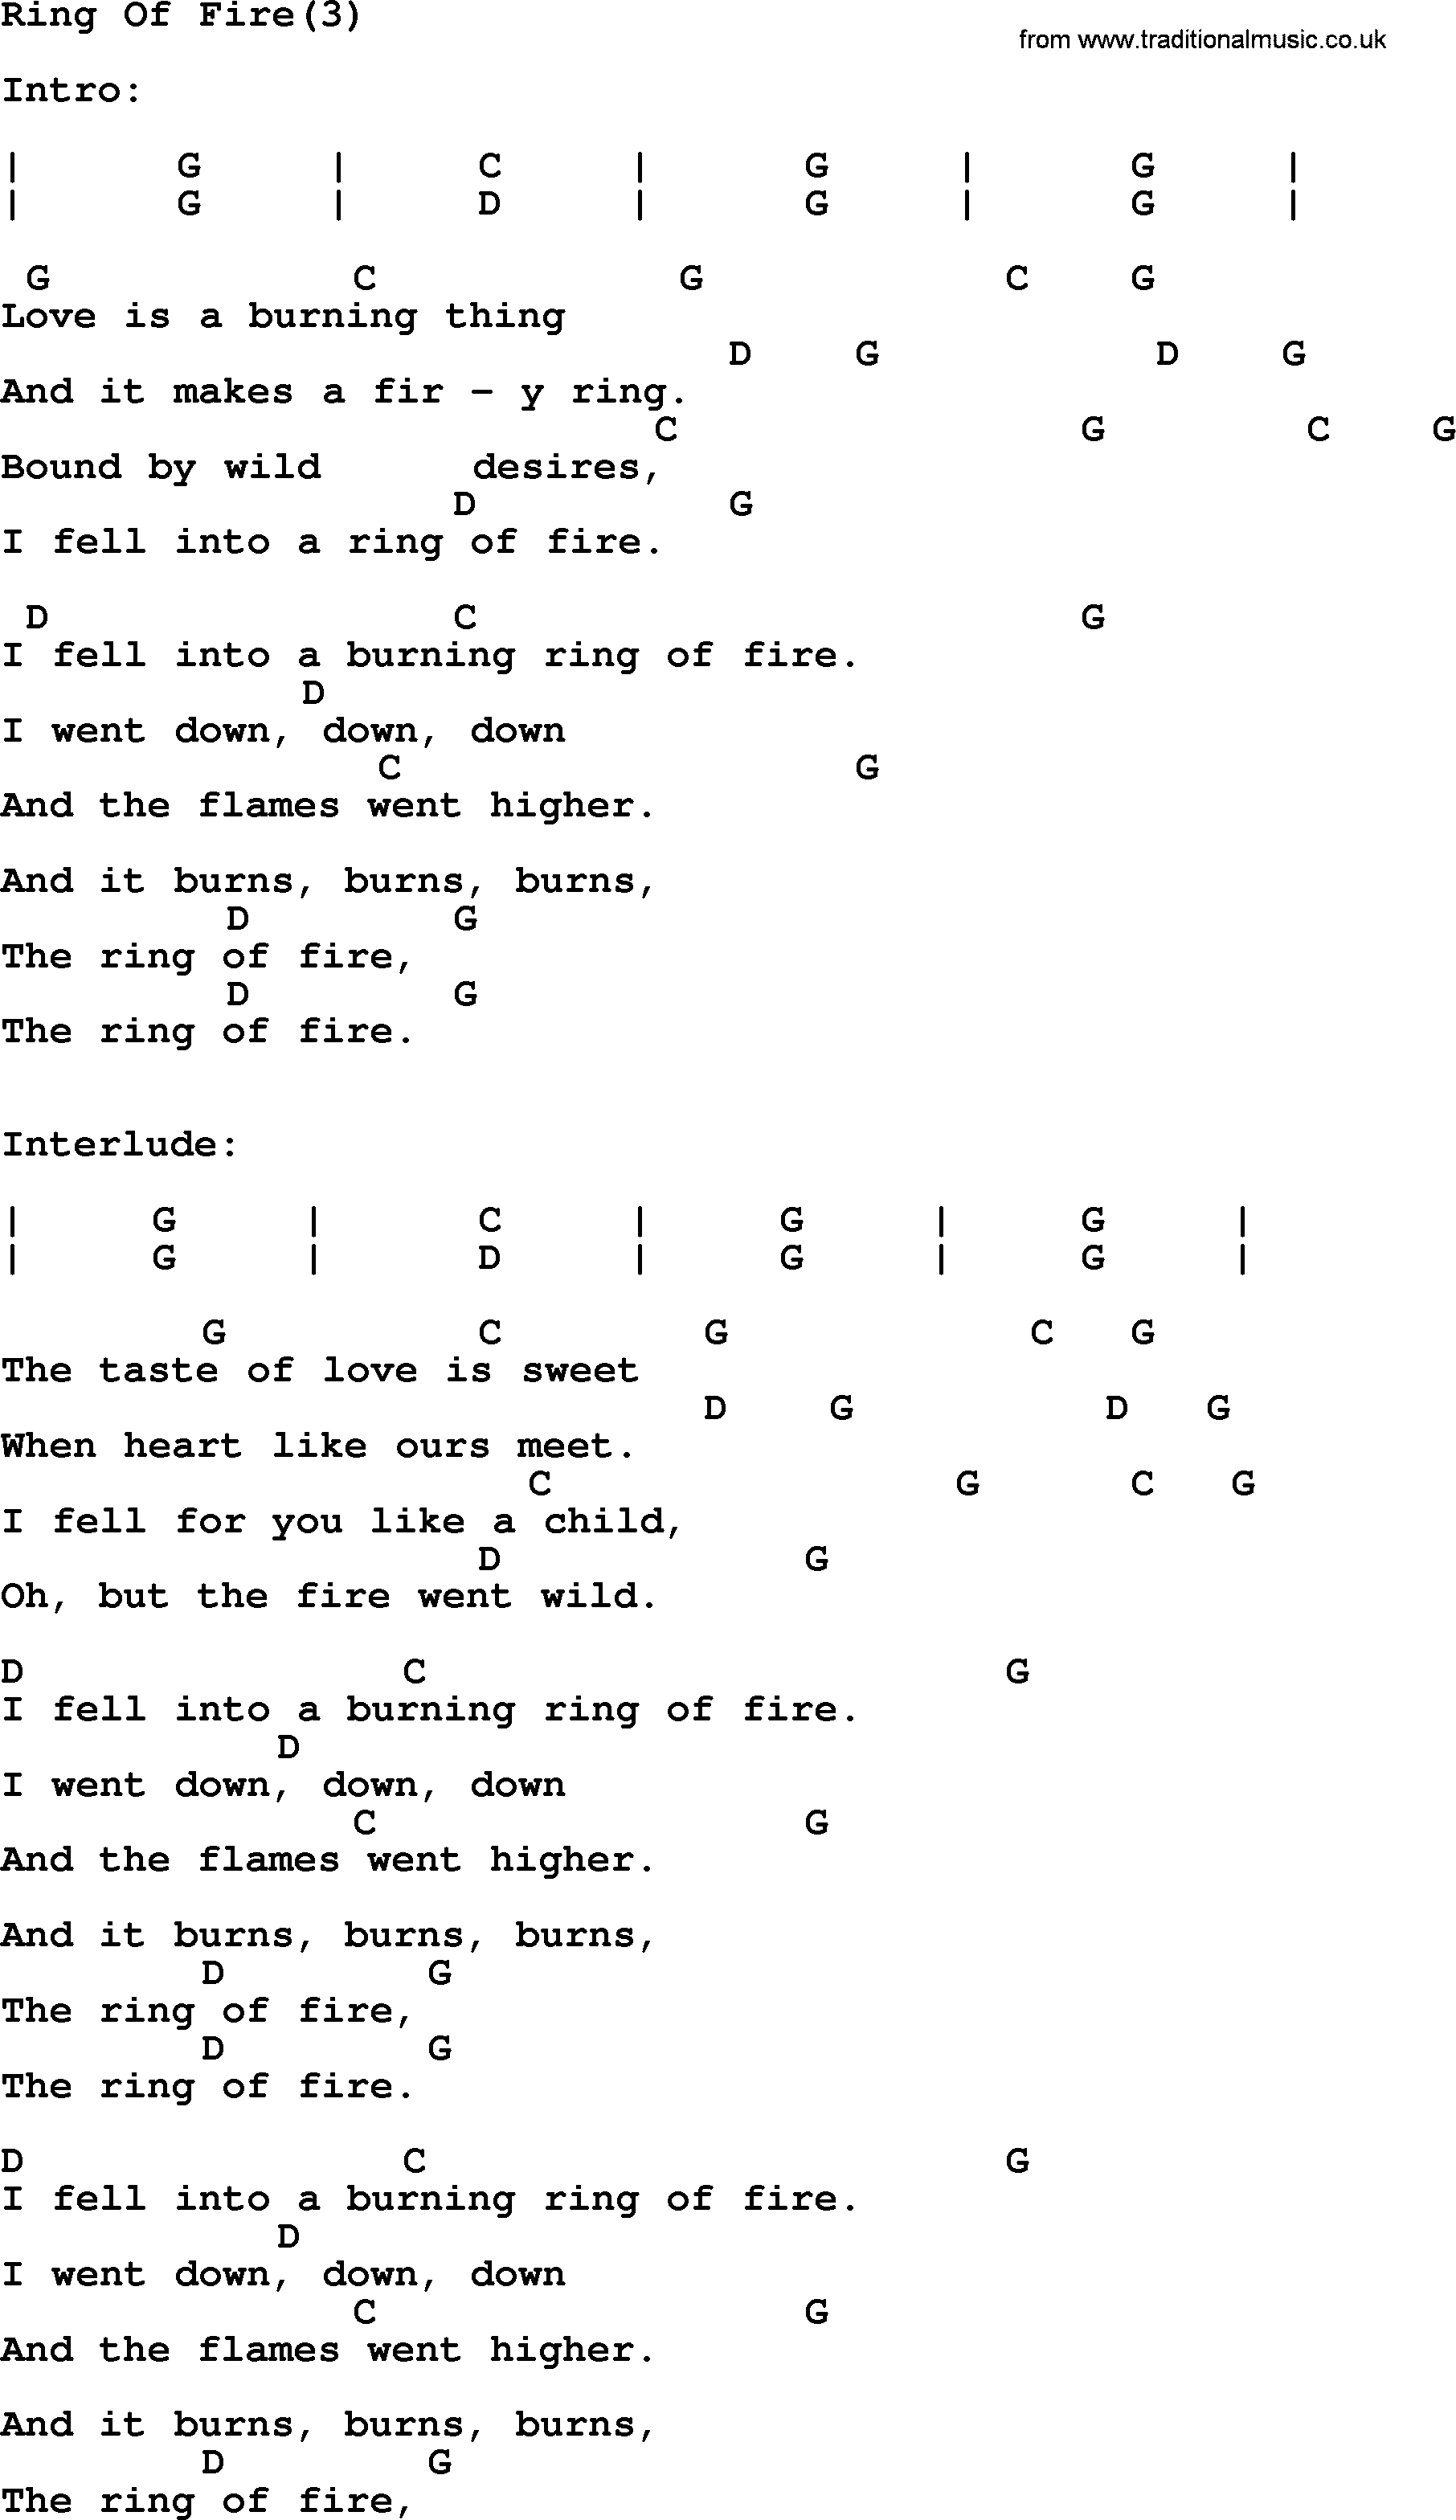 Johnny Cash song Ring Of Fire(3), lyrics and chords